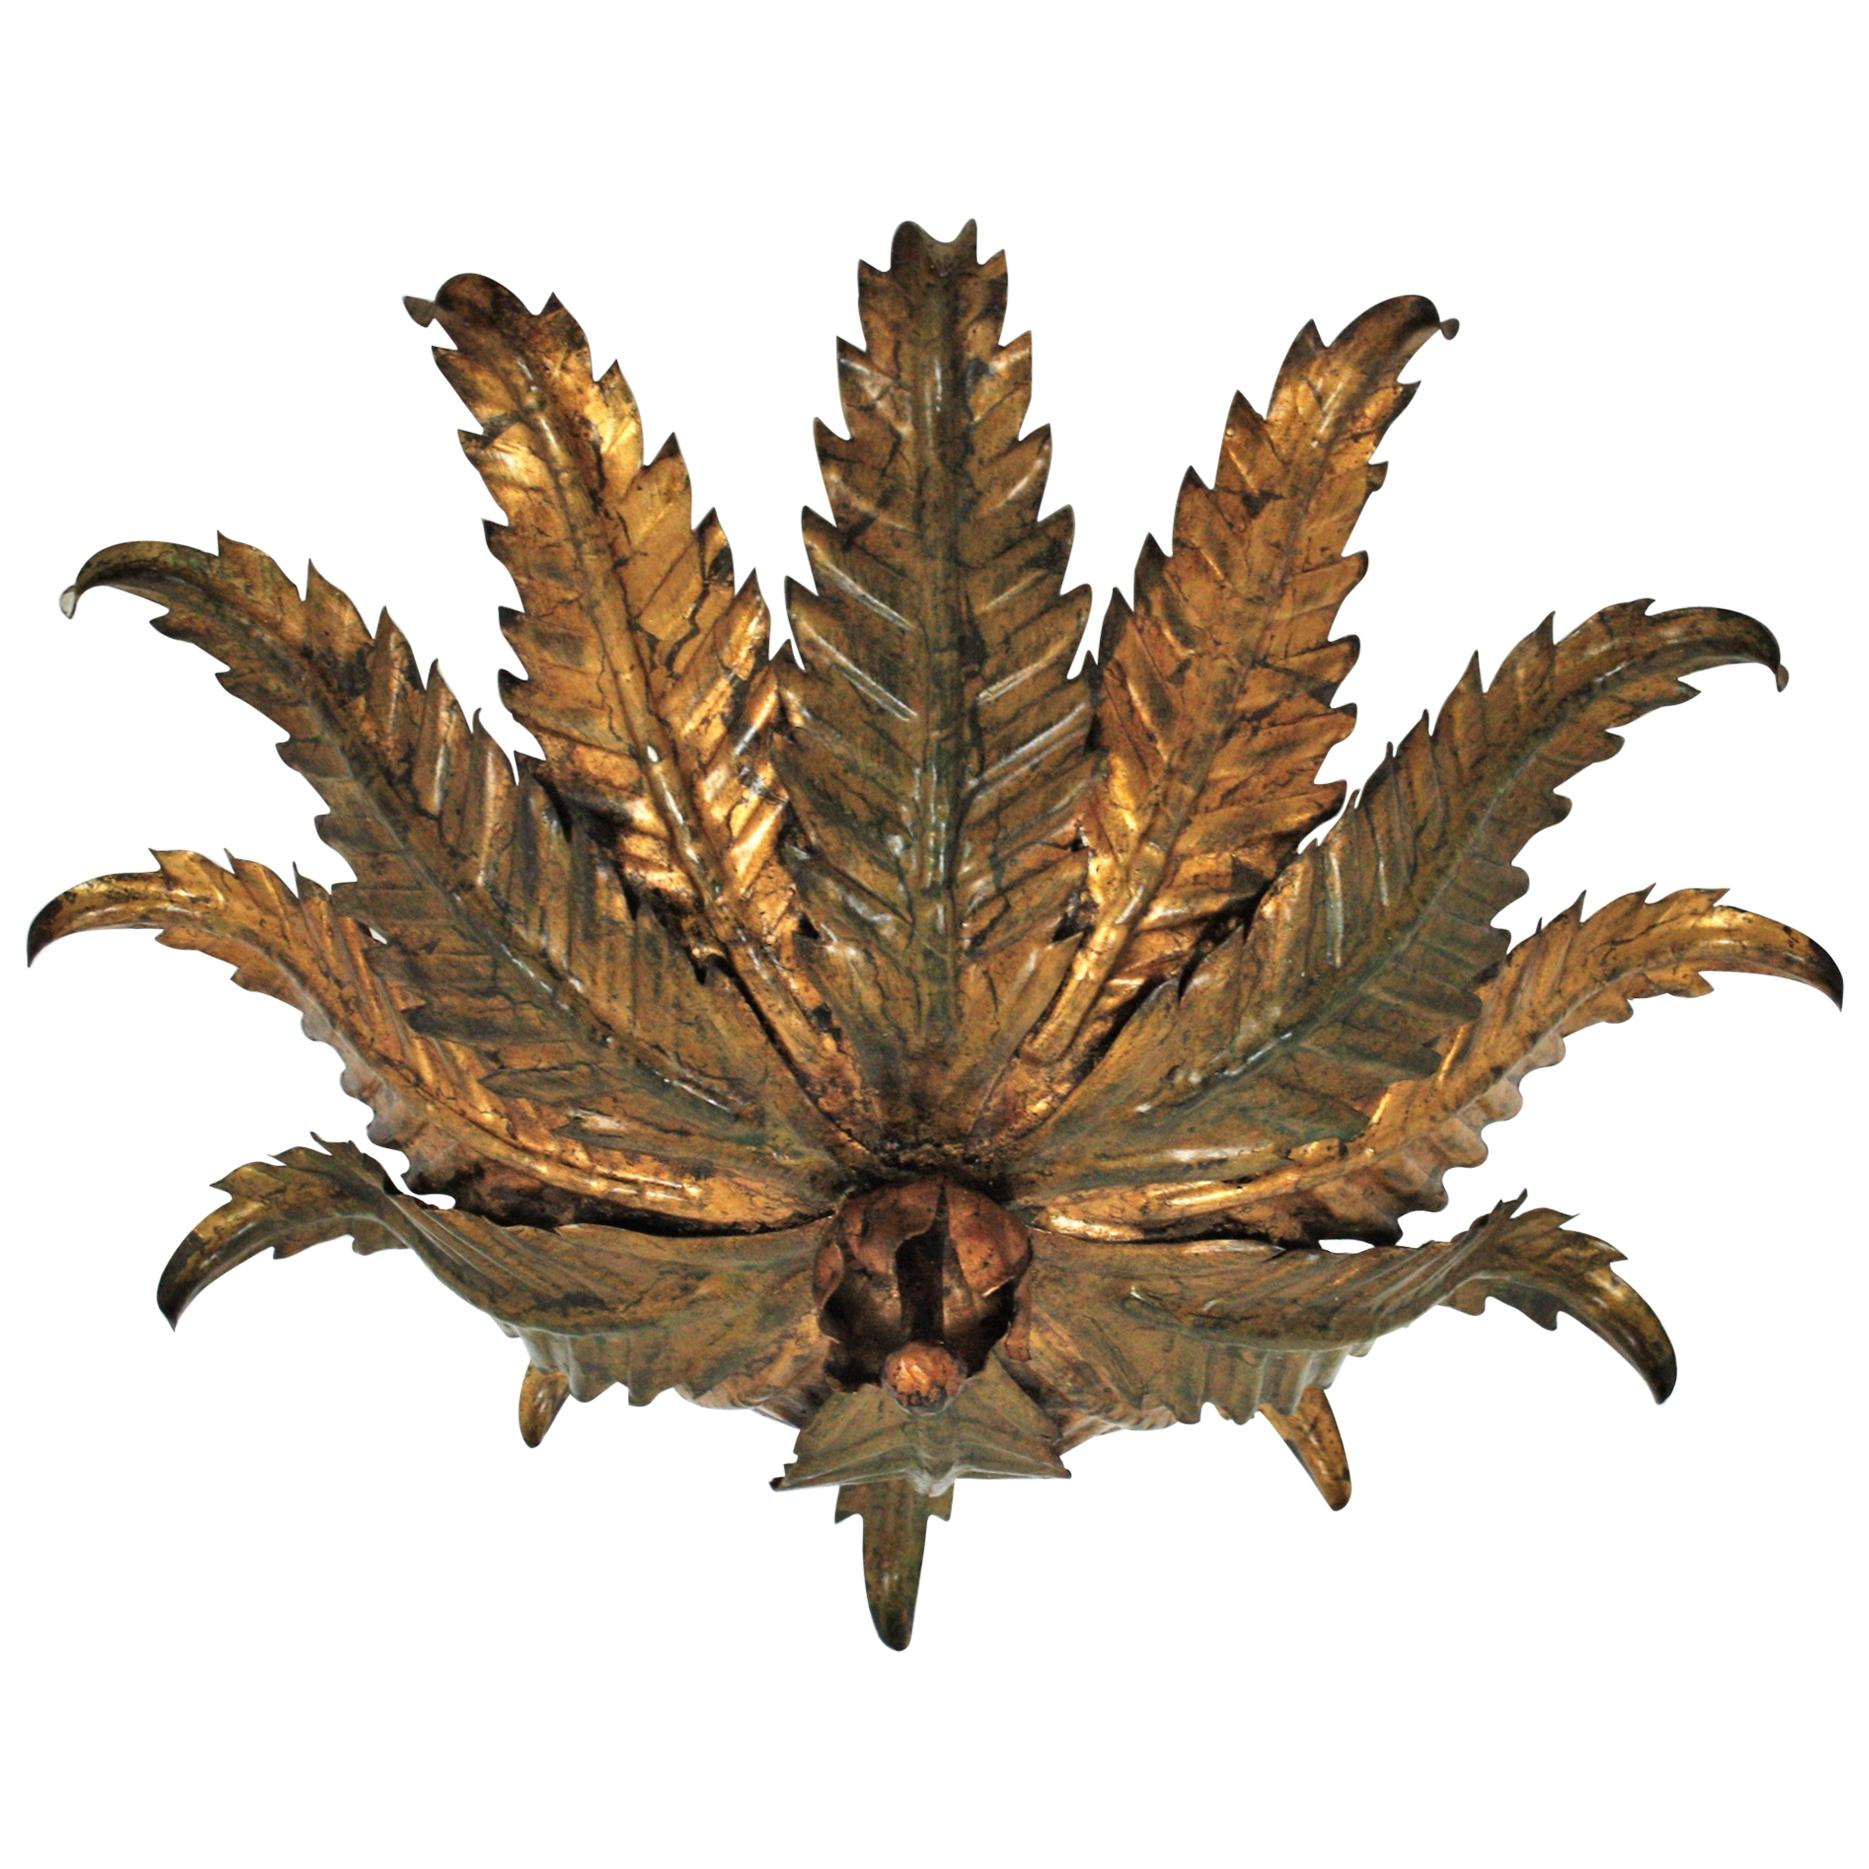 Spanish Sunburst Floral flush mount in two-tone green and gilt wrought iron, 1950s
This eye-catching hand-hammered gilt iron floral ceiling light fixture has gilded leaves alternating with other with green accents.
The canopy with flower shape and